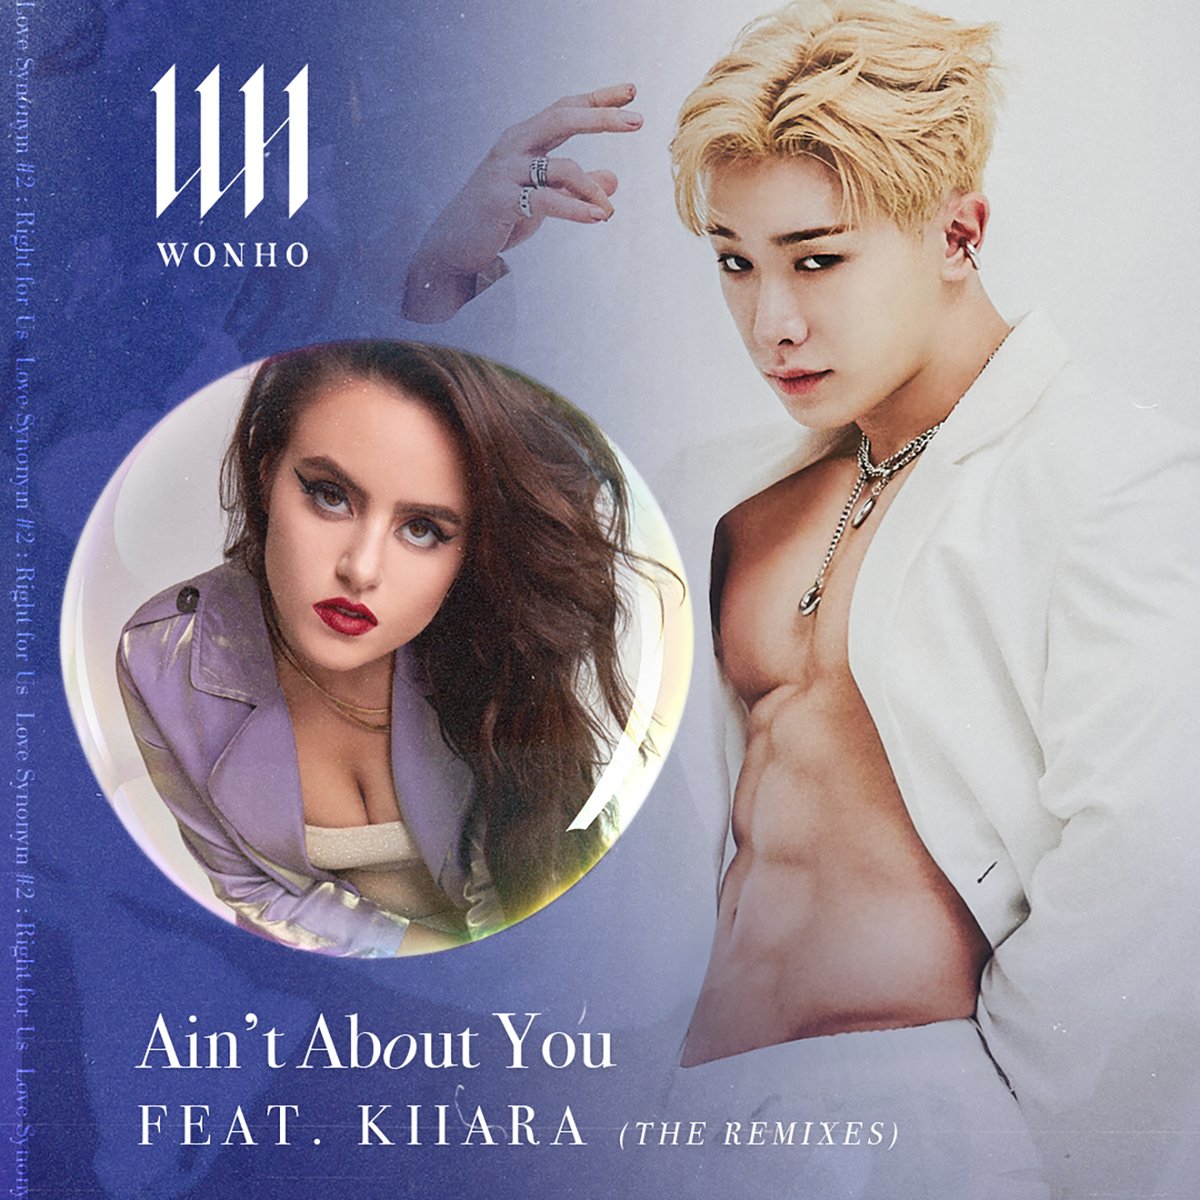 A four-song remix package of @official__Wonho and @Kiiara's 'Ain't About You' is scheduled to drop tonight at midnight ET. @TIDAL will have the songs in Master Quality Audio, look out for it #Wenee! Here's the HQ cover